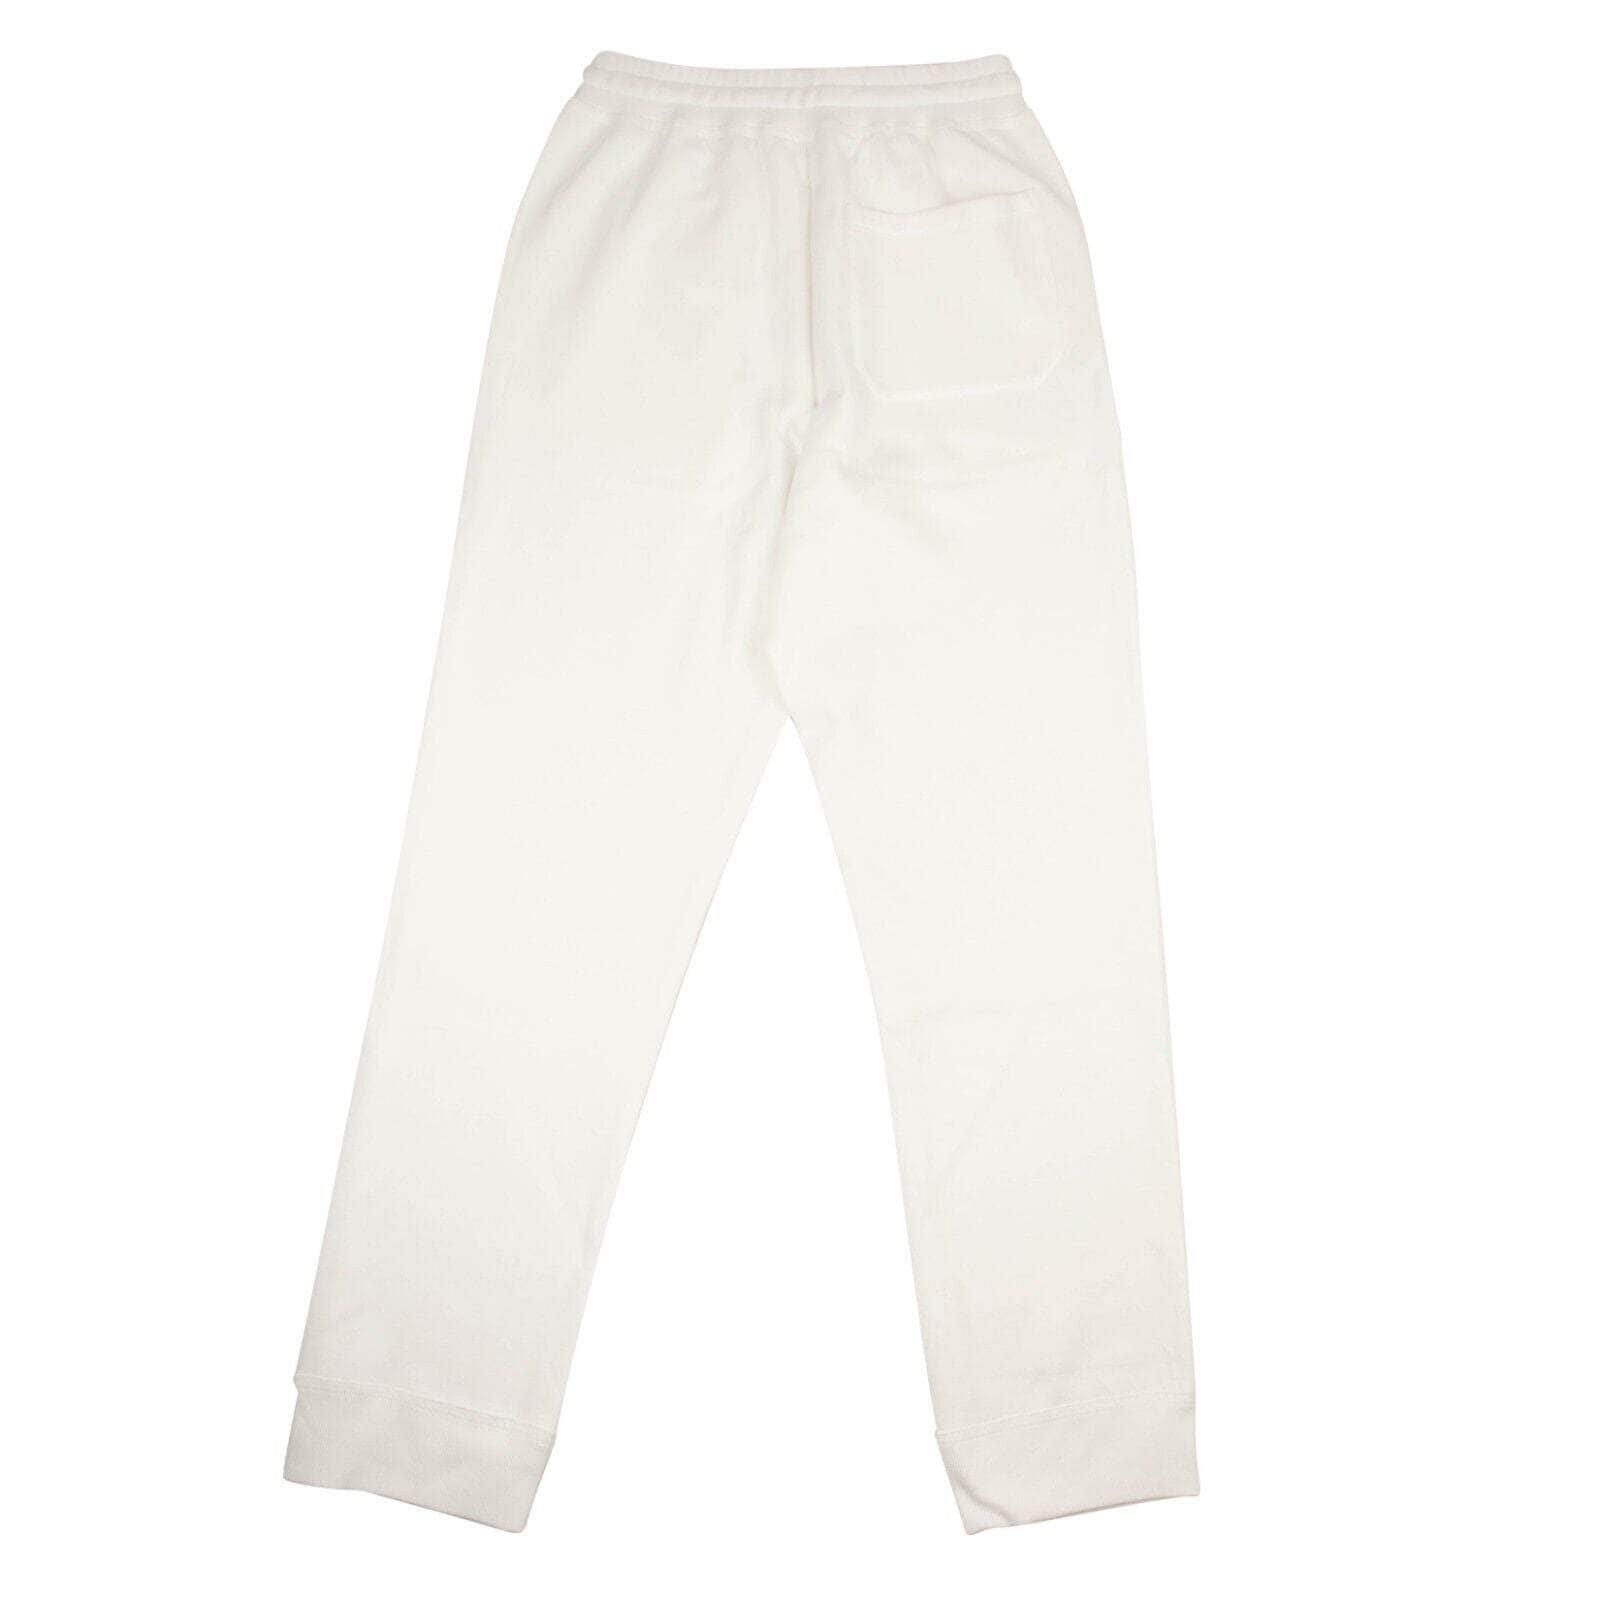 Valentino 250-500, channelenable-all, chicmi, couponcollection, gender-mens, main-clothing, mens-casual-pants, mens-shoes, size-l, size-s, valentino White Jersey Studded Pantalone Sweatpants